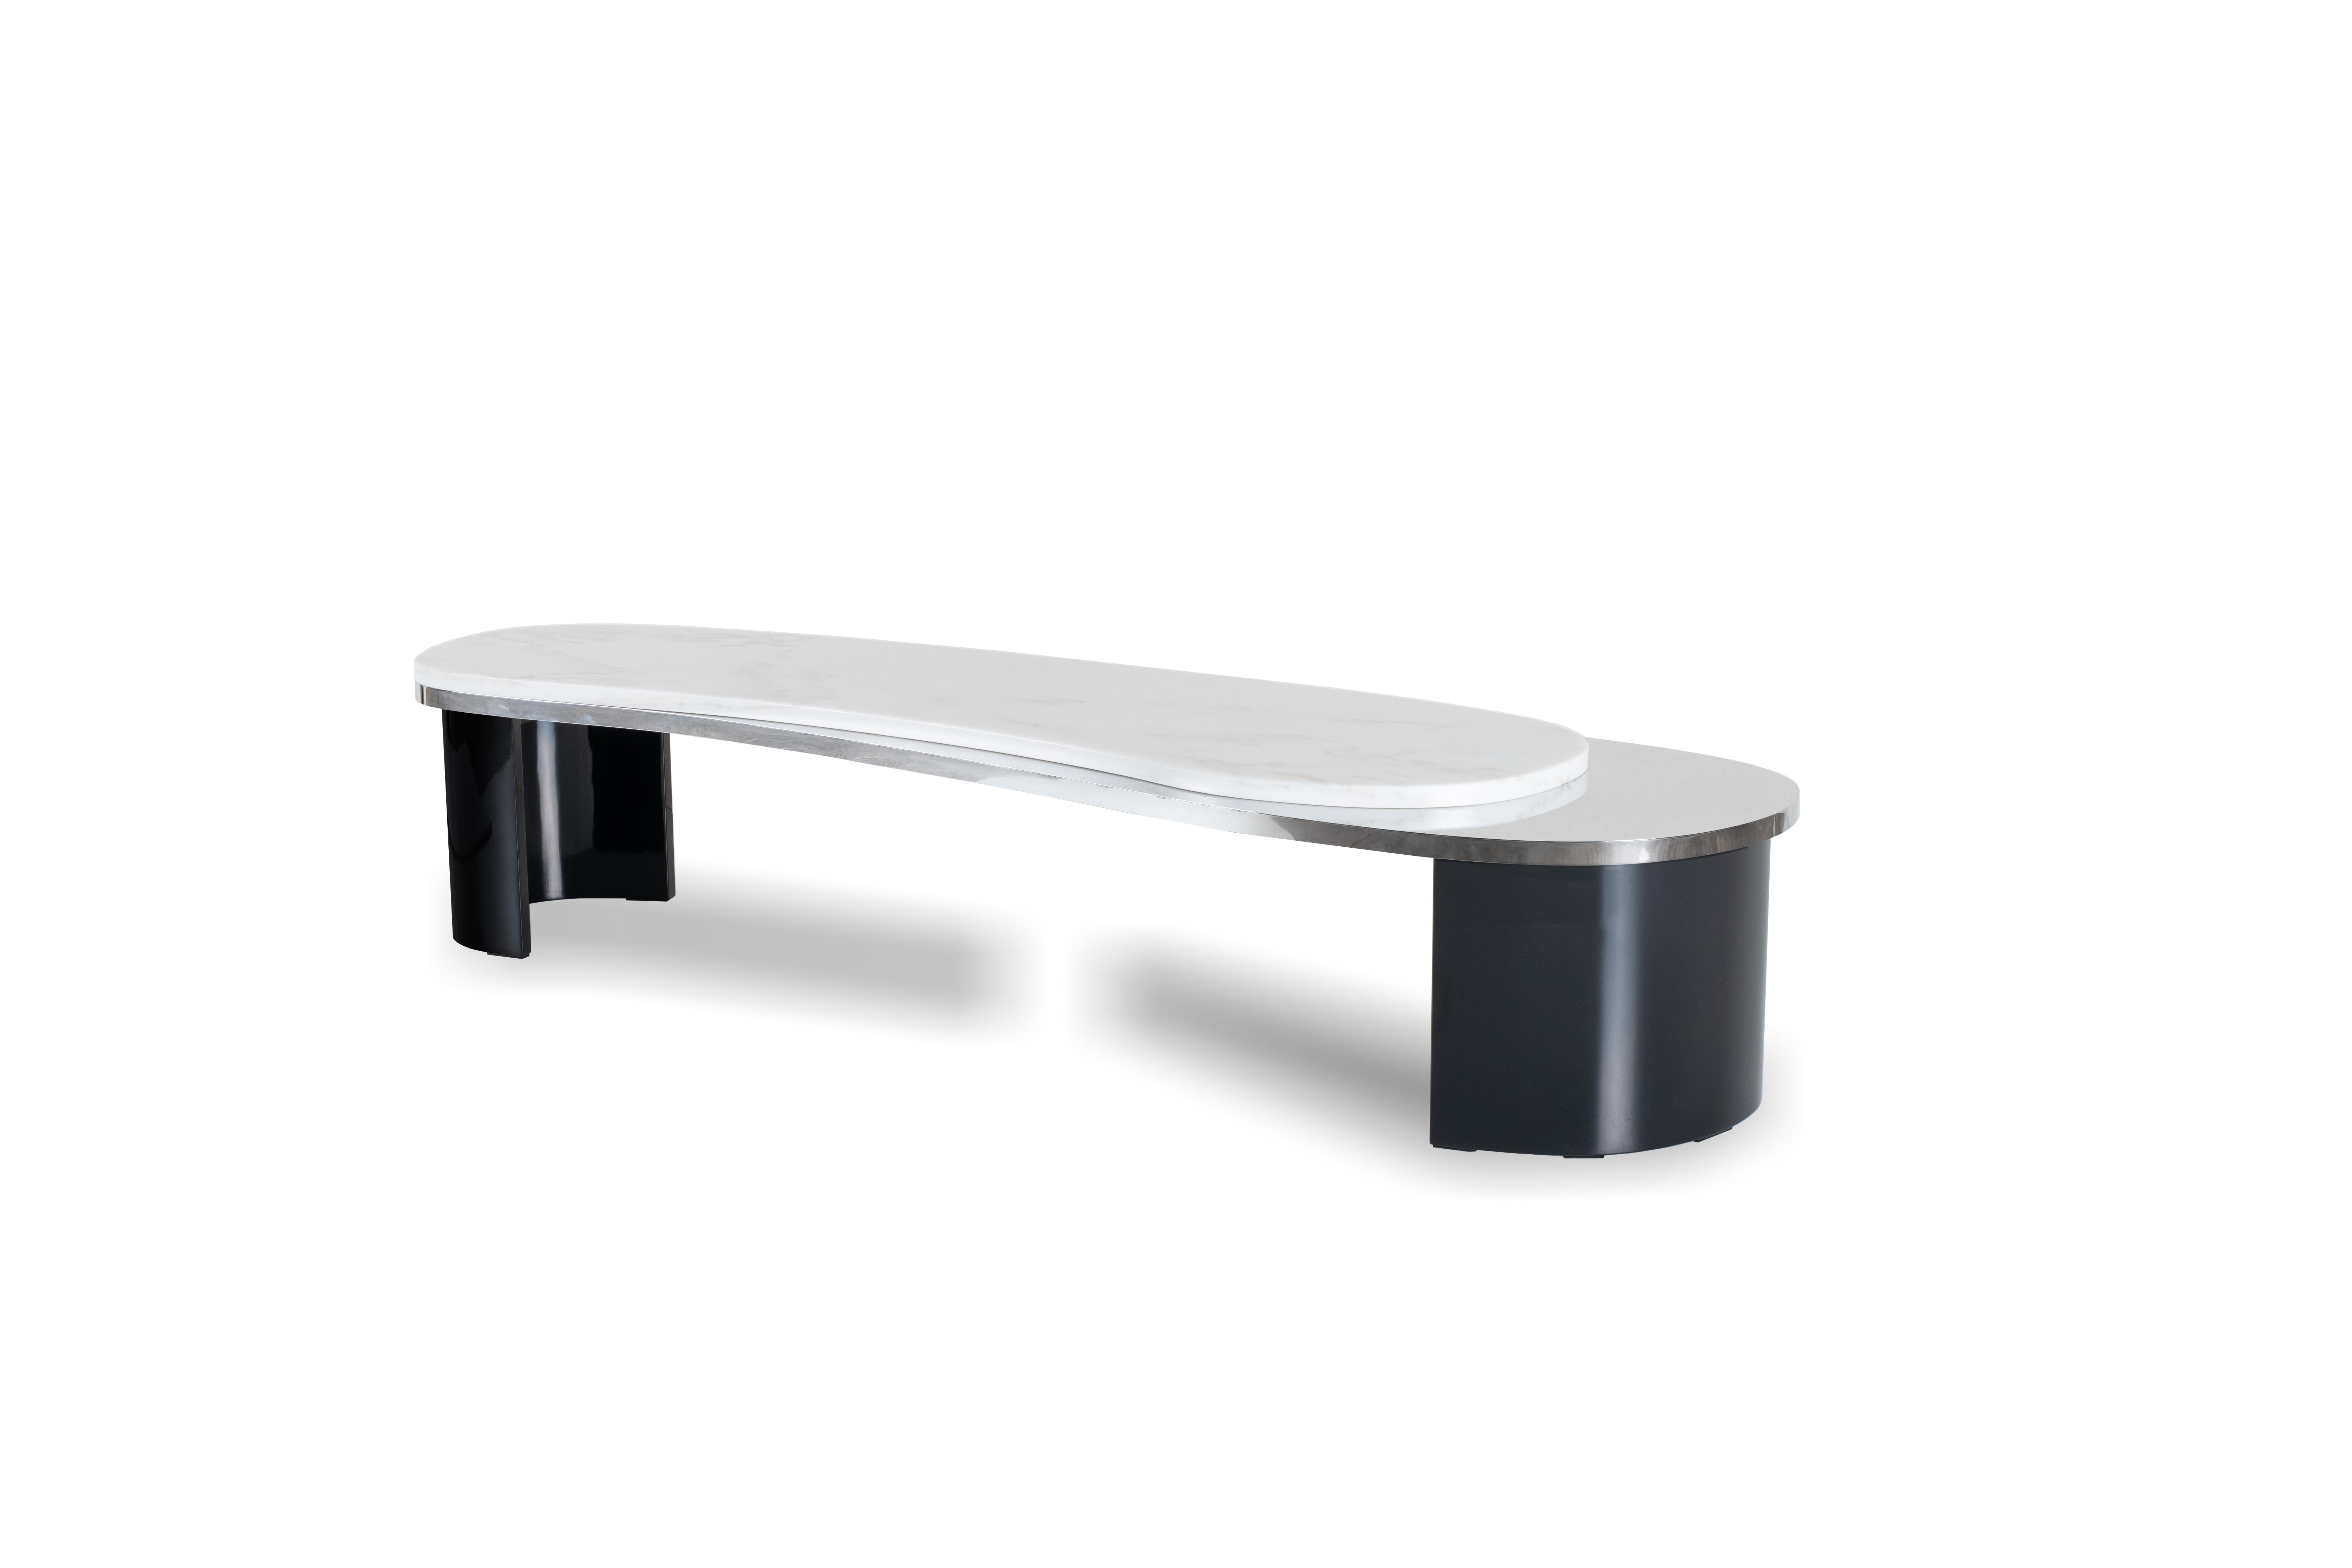 Marble coffee table by Green Apple
Dimensions: H 30 x W 150 x D 46 cm
Materials: Black lacquer; high-gloss finish
Polished stainless steel
Calacatta Bianco marble; polished

Wooden coffee table with top in polished stainless steel and polished